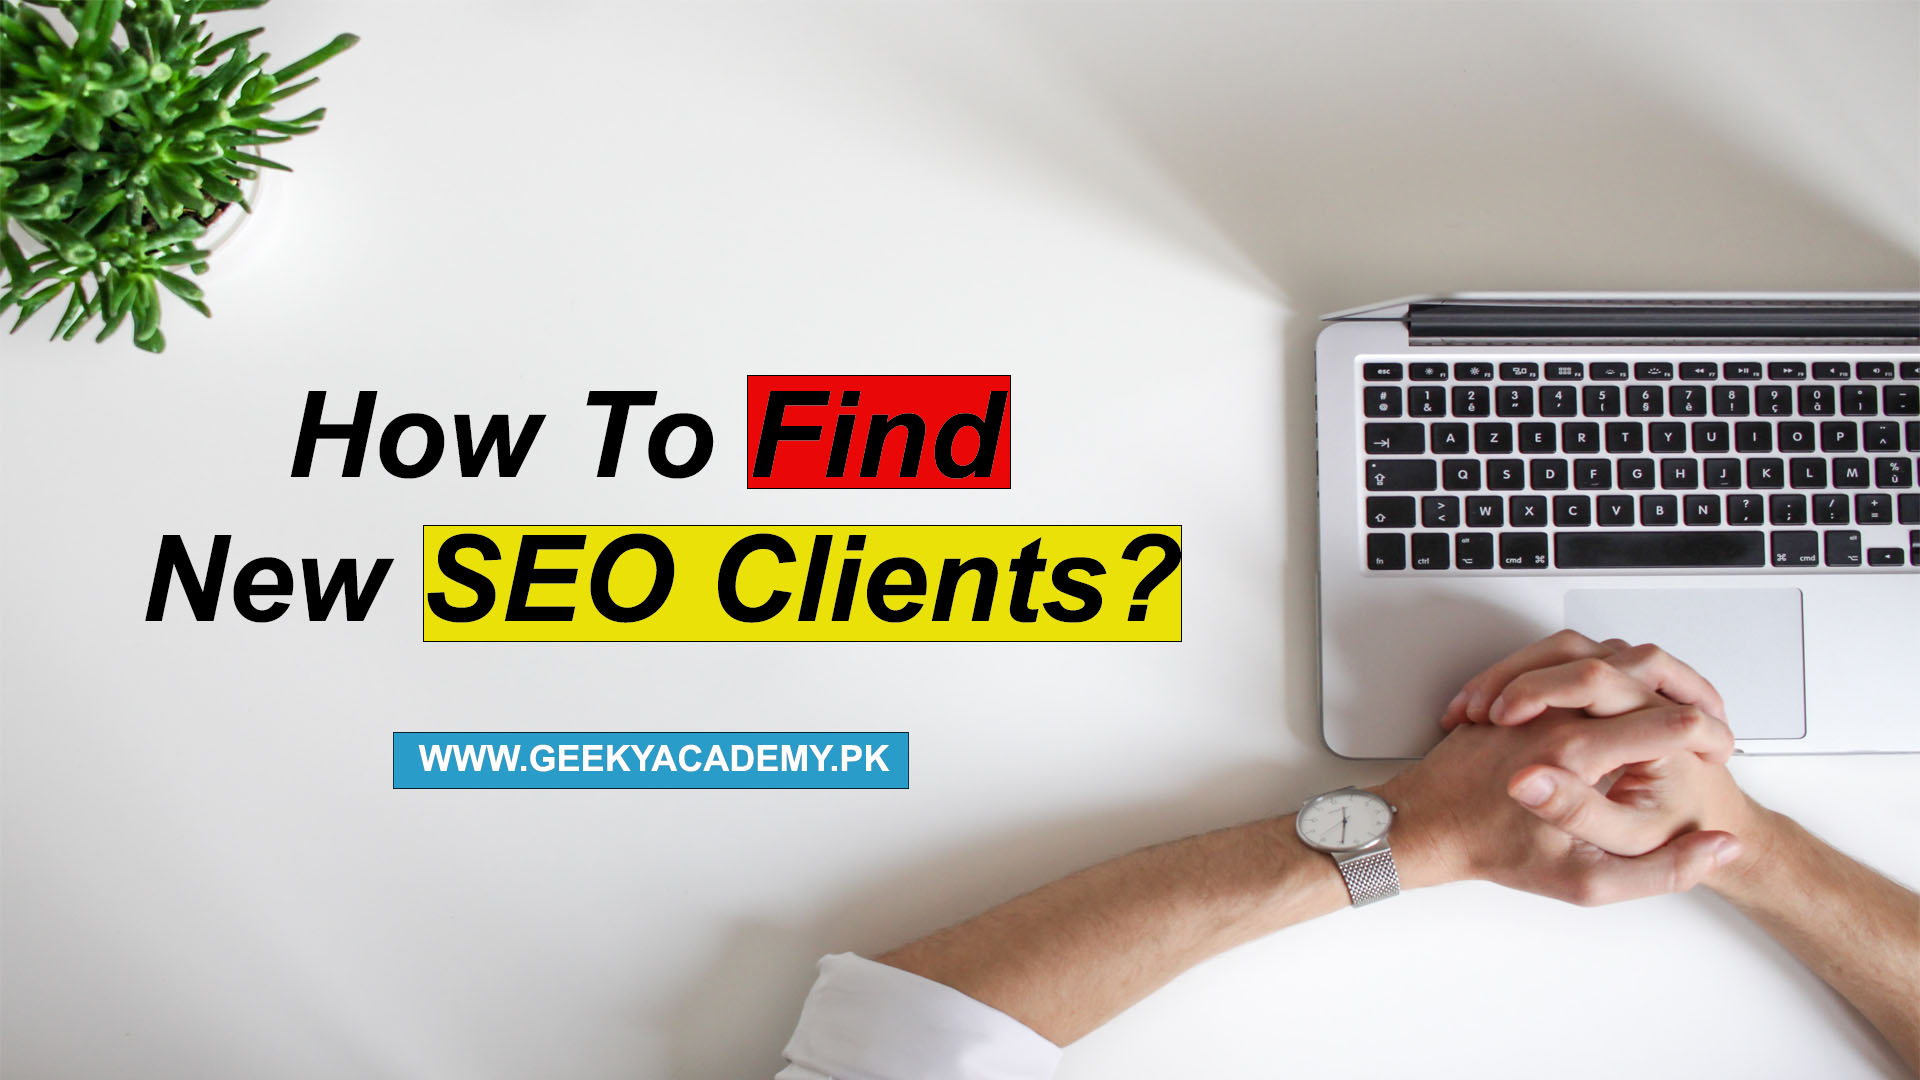 How To Find New SEO Clients